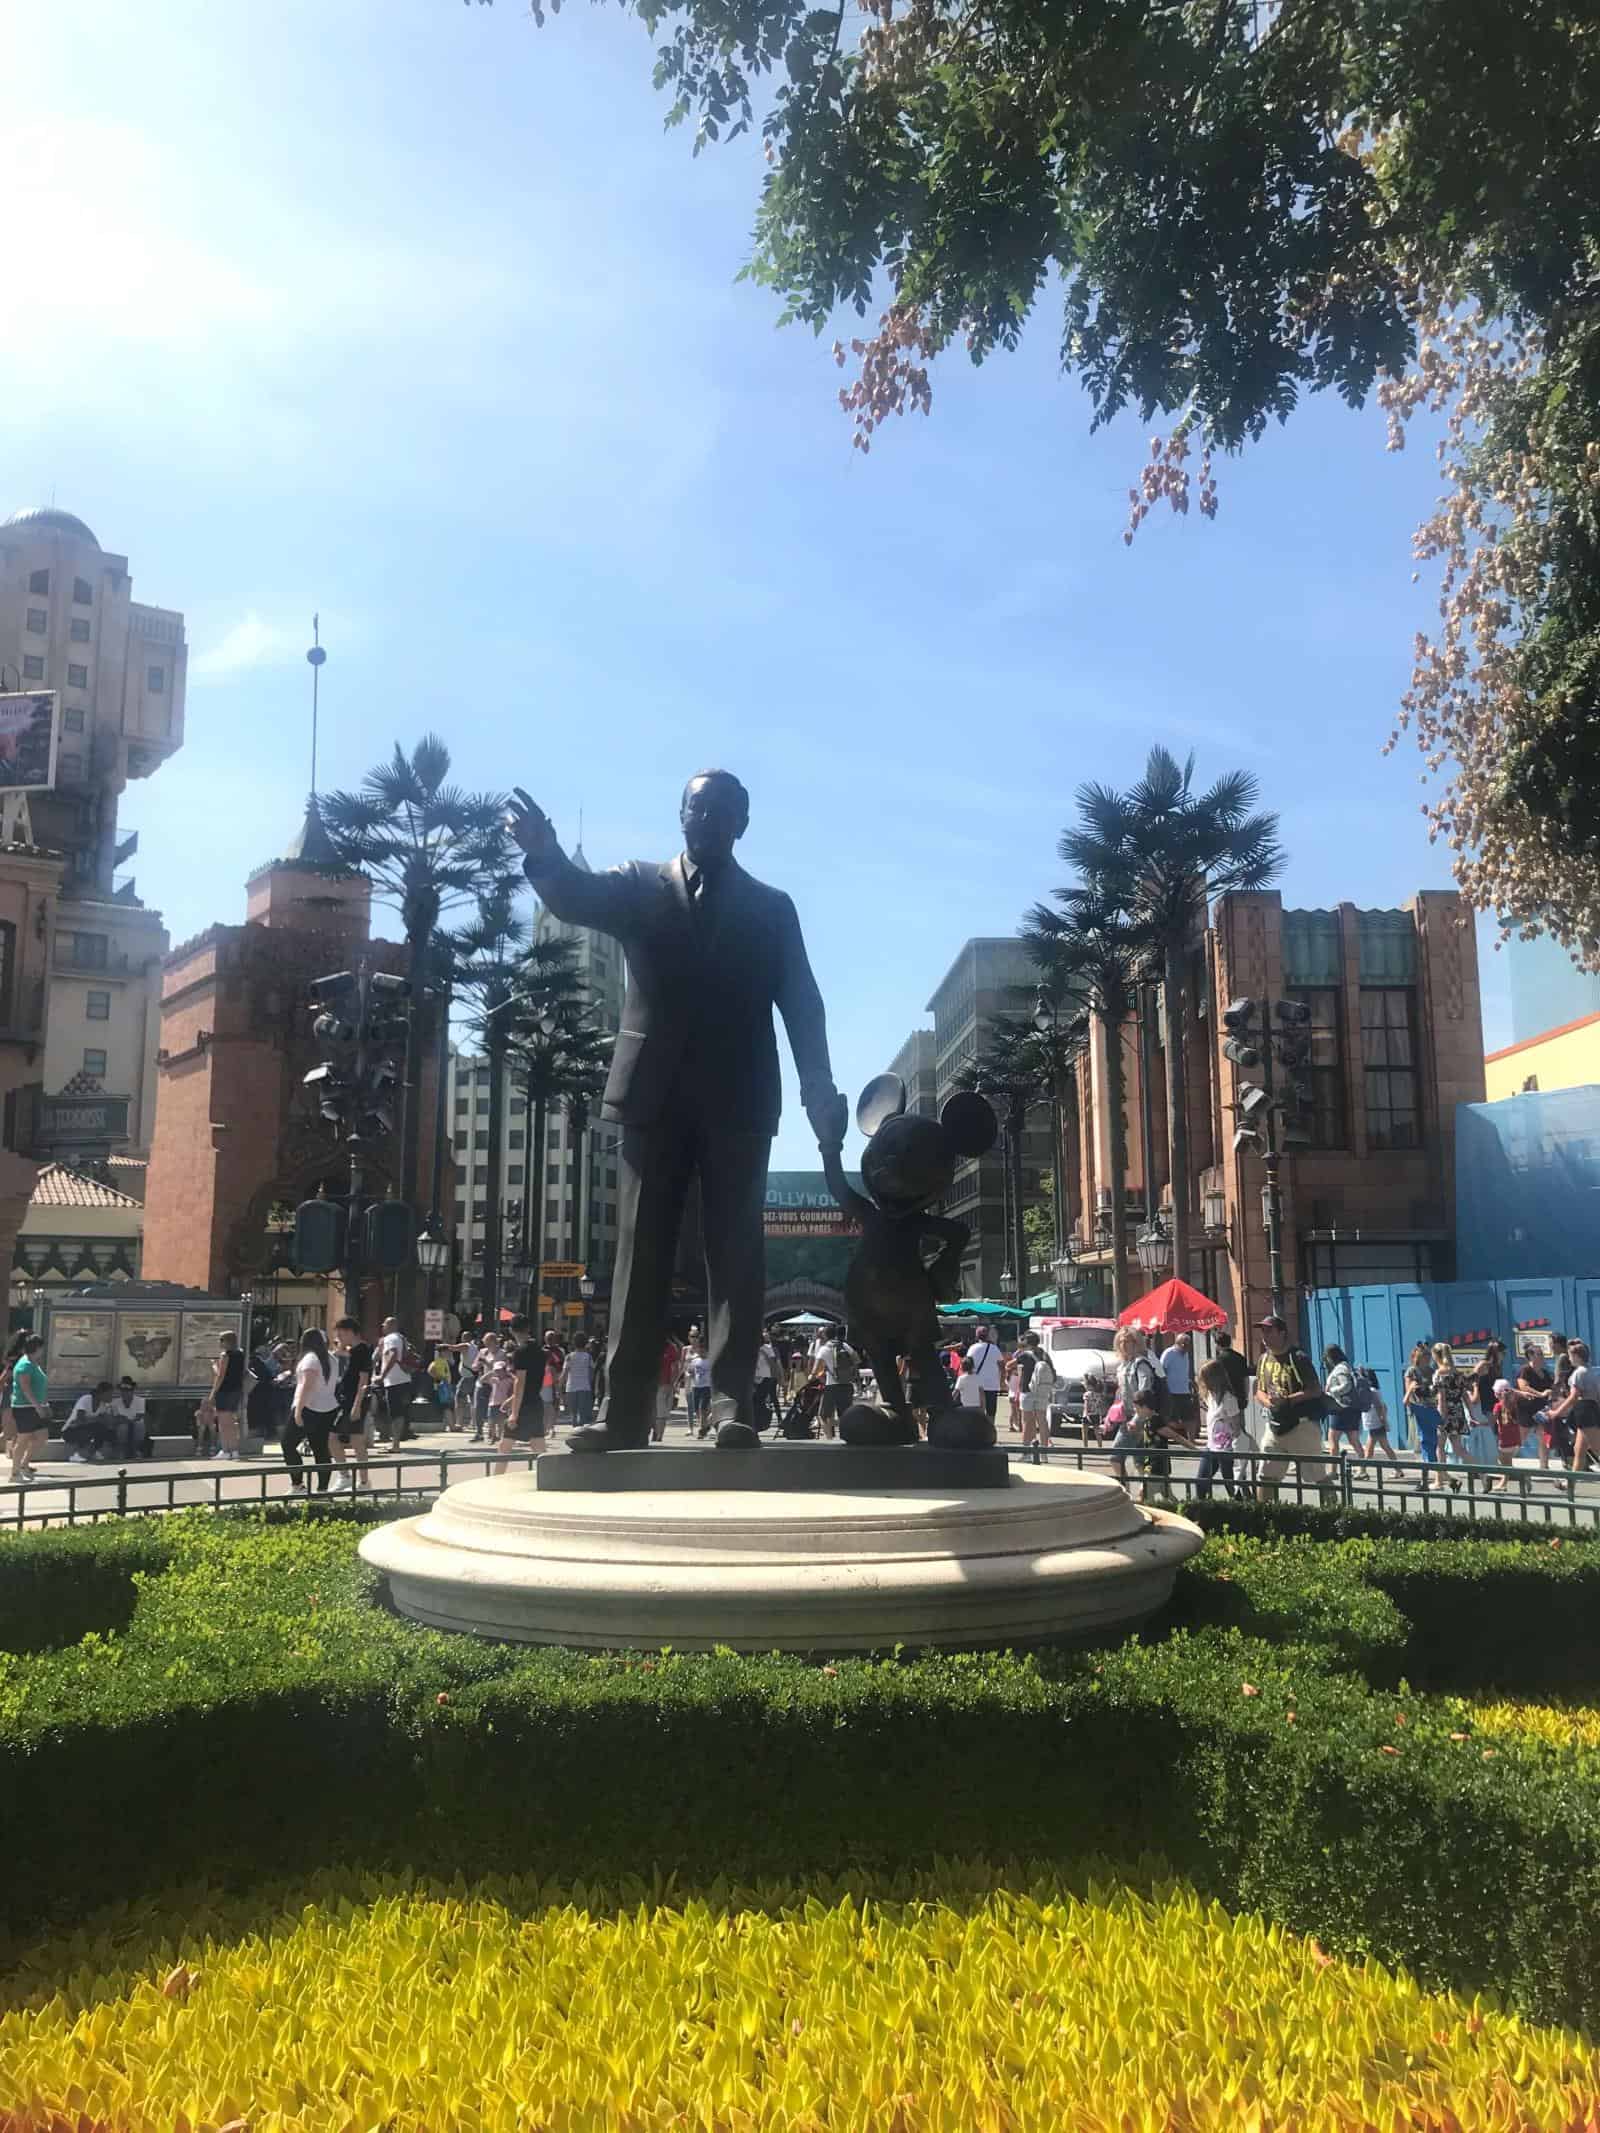 Statue of Walt Disney and Mickey Mouse in Disneyland paris